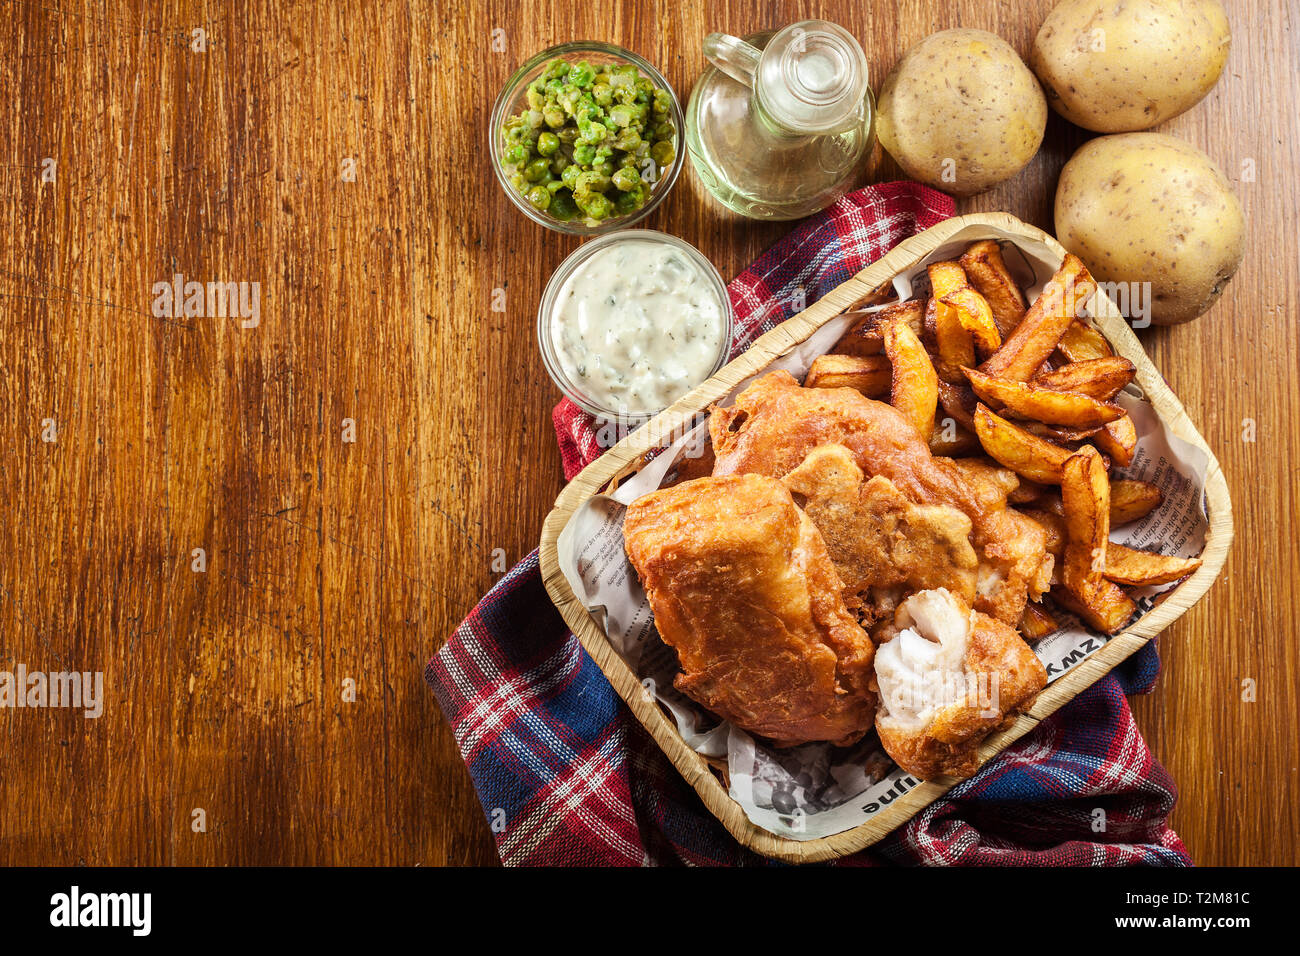 Traditional fish in beer batter and chips served on basket. Top view Stock Photo